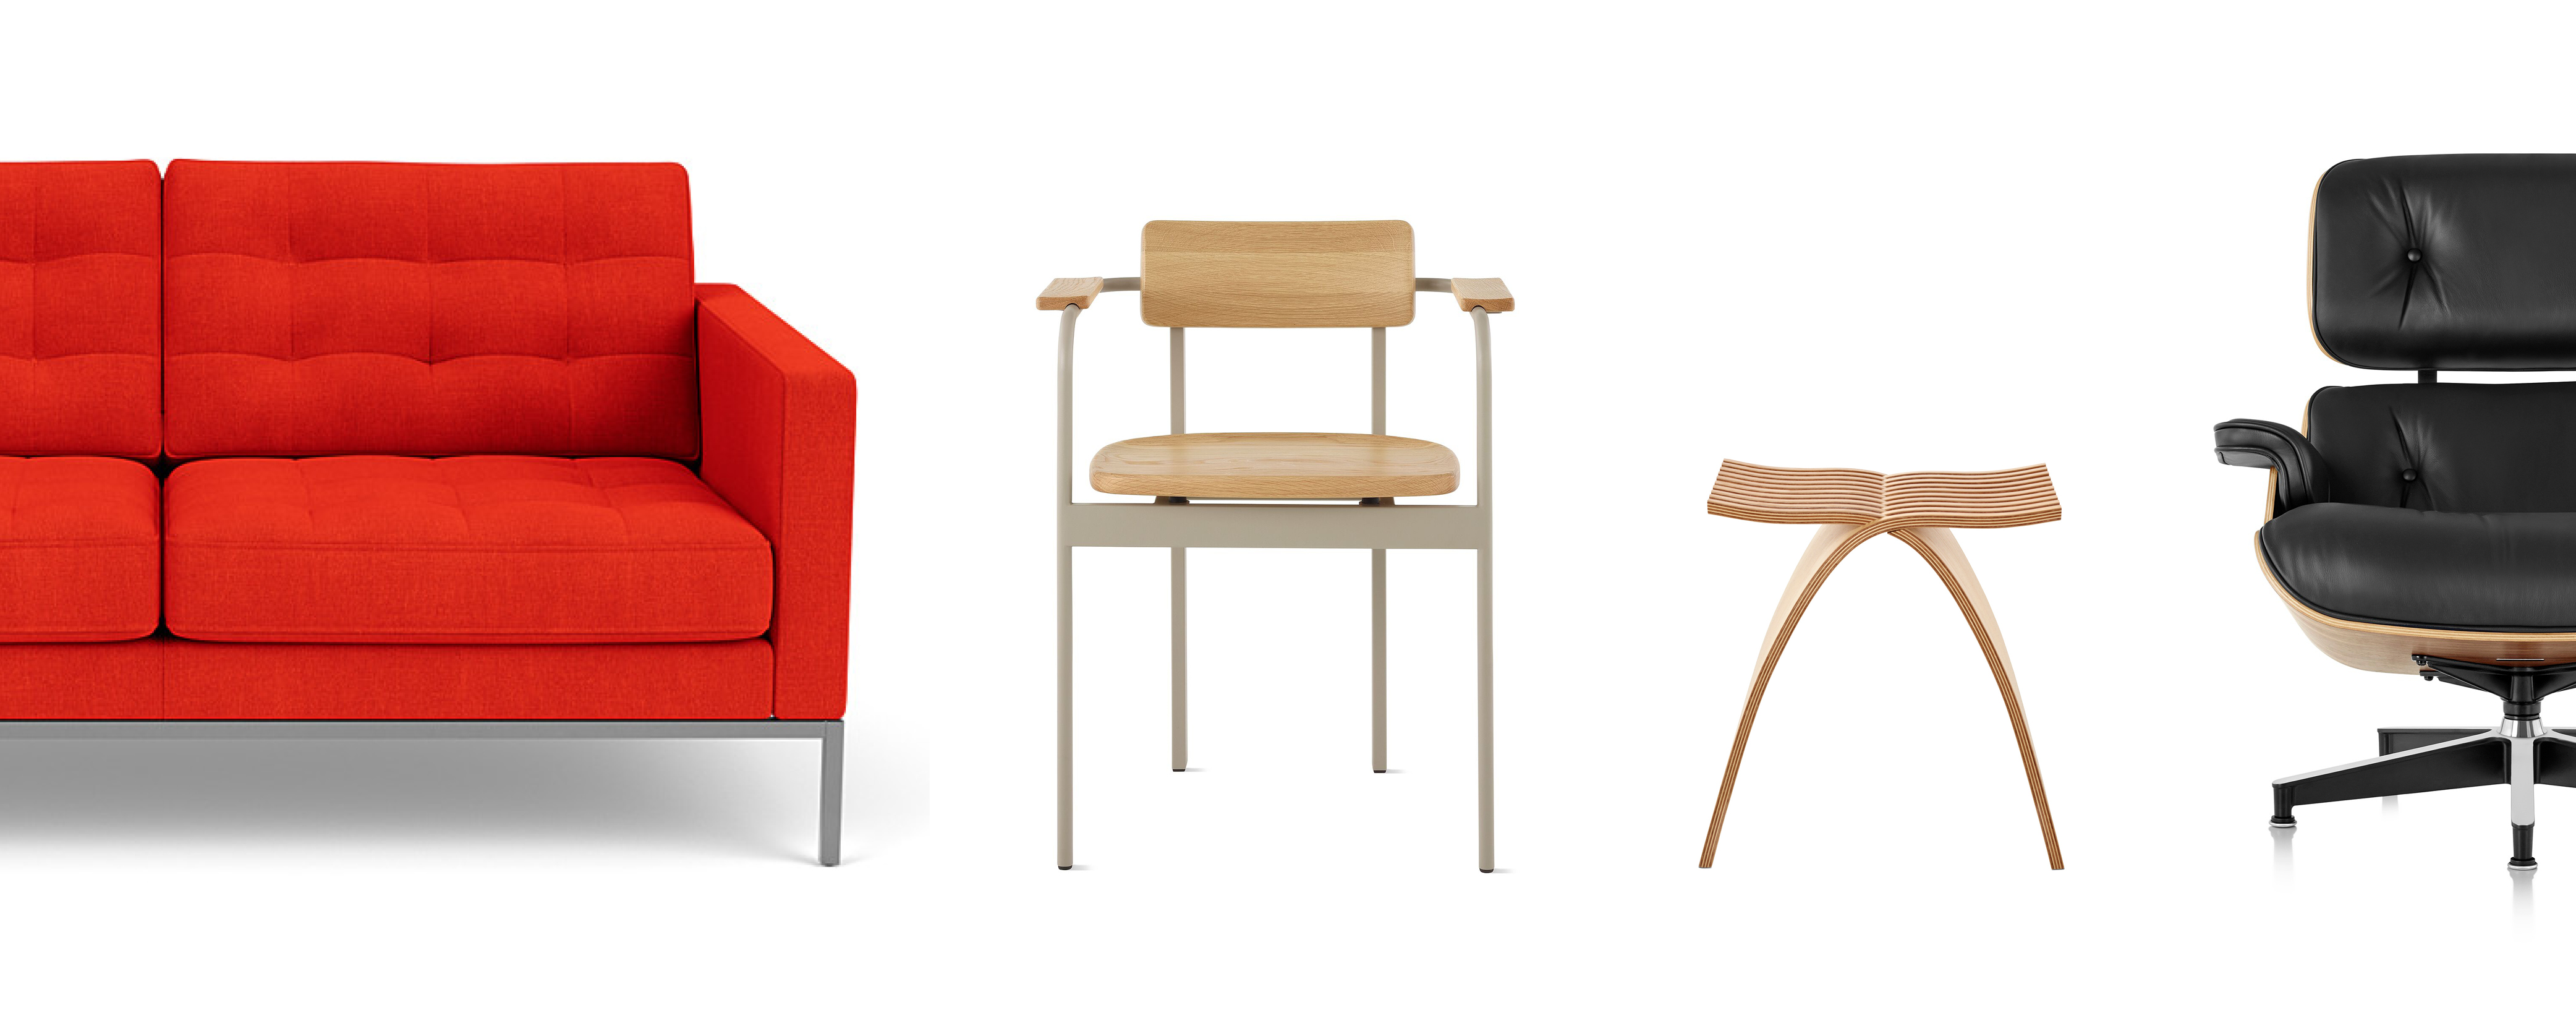 A collection of popular designs produced by Herman Miller designed by women